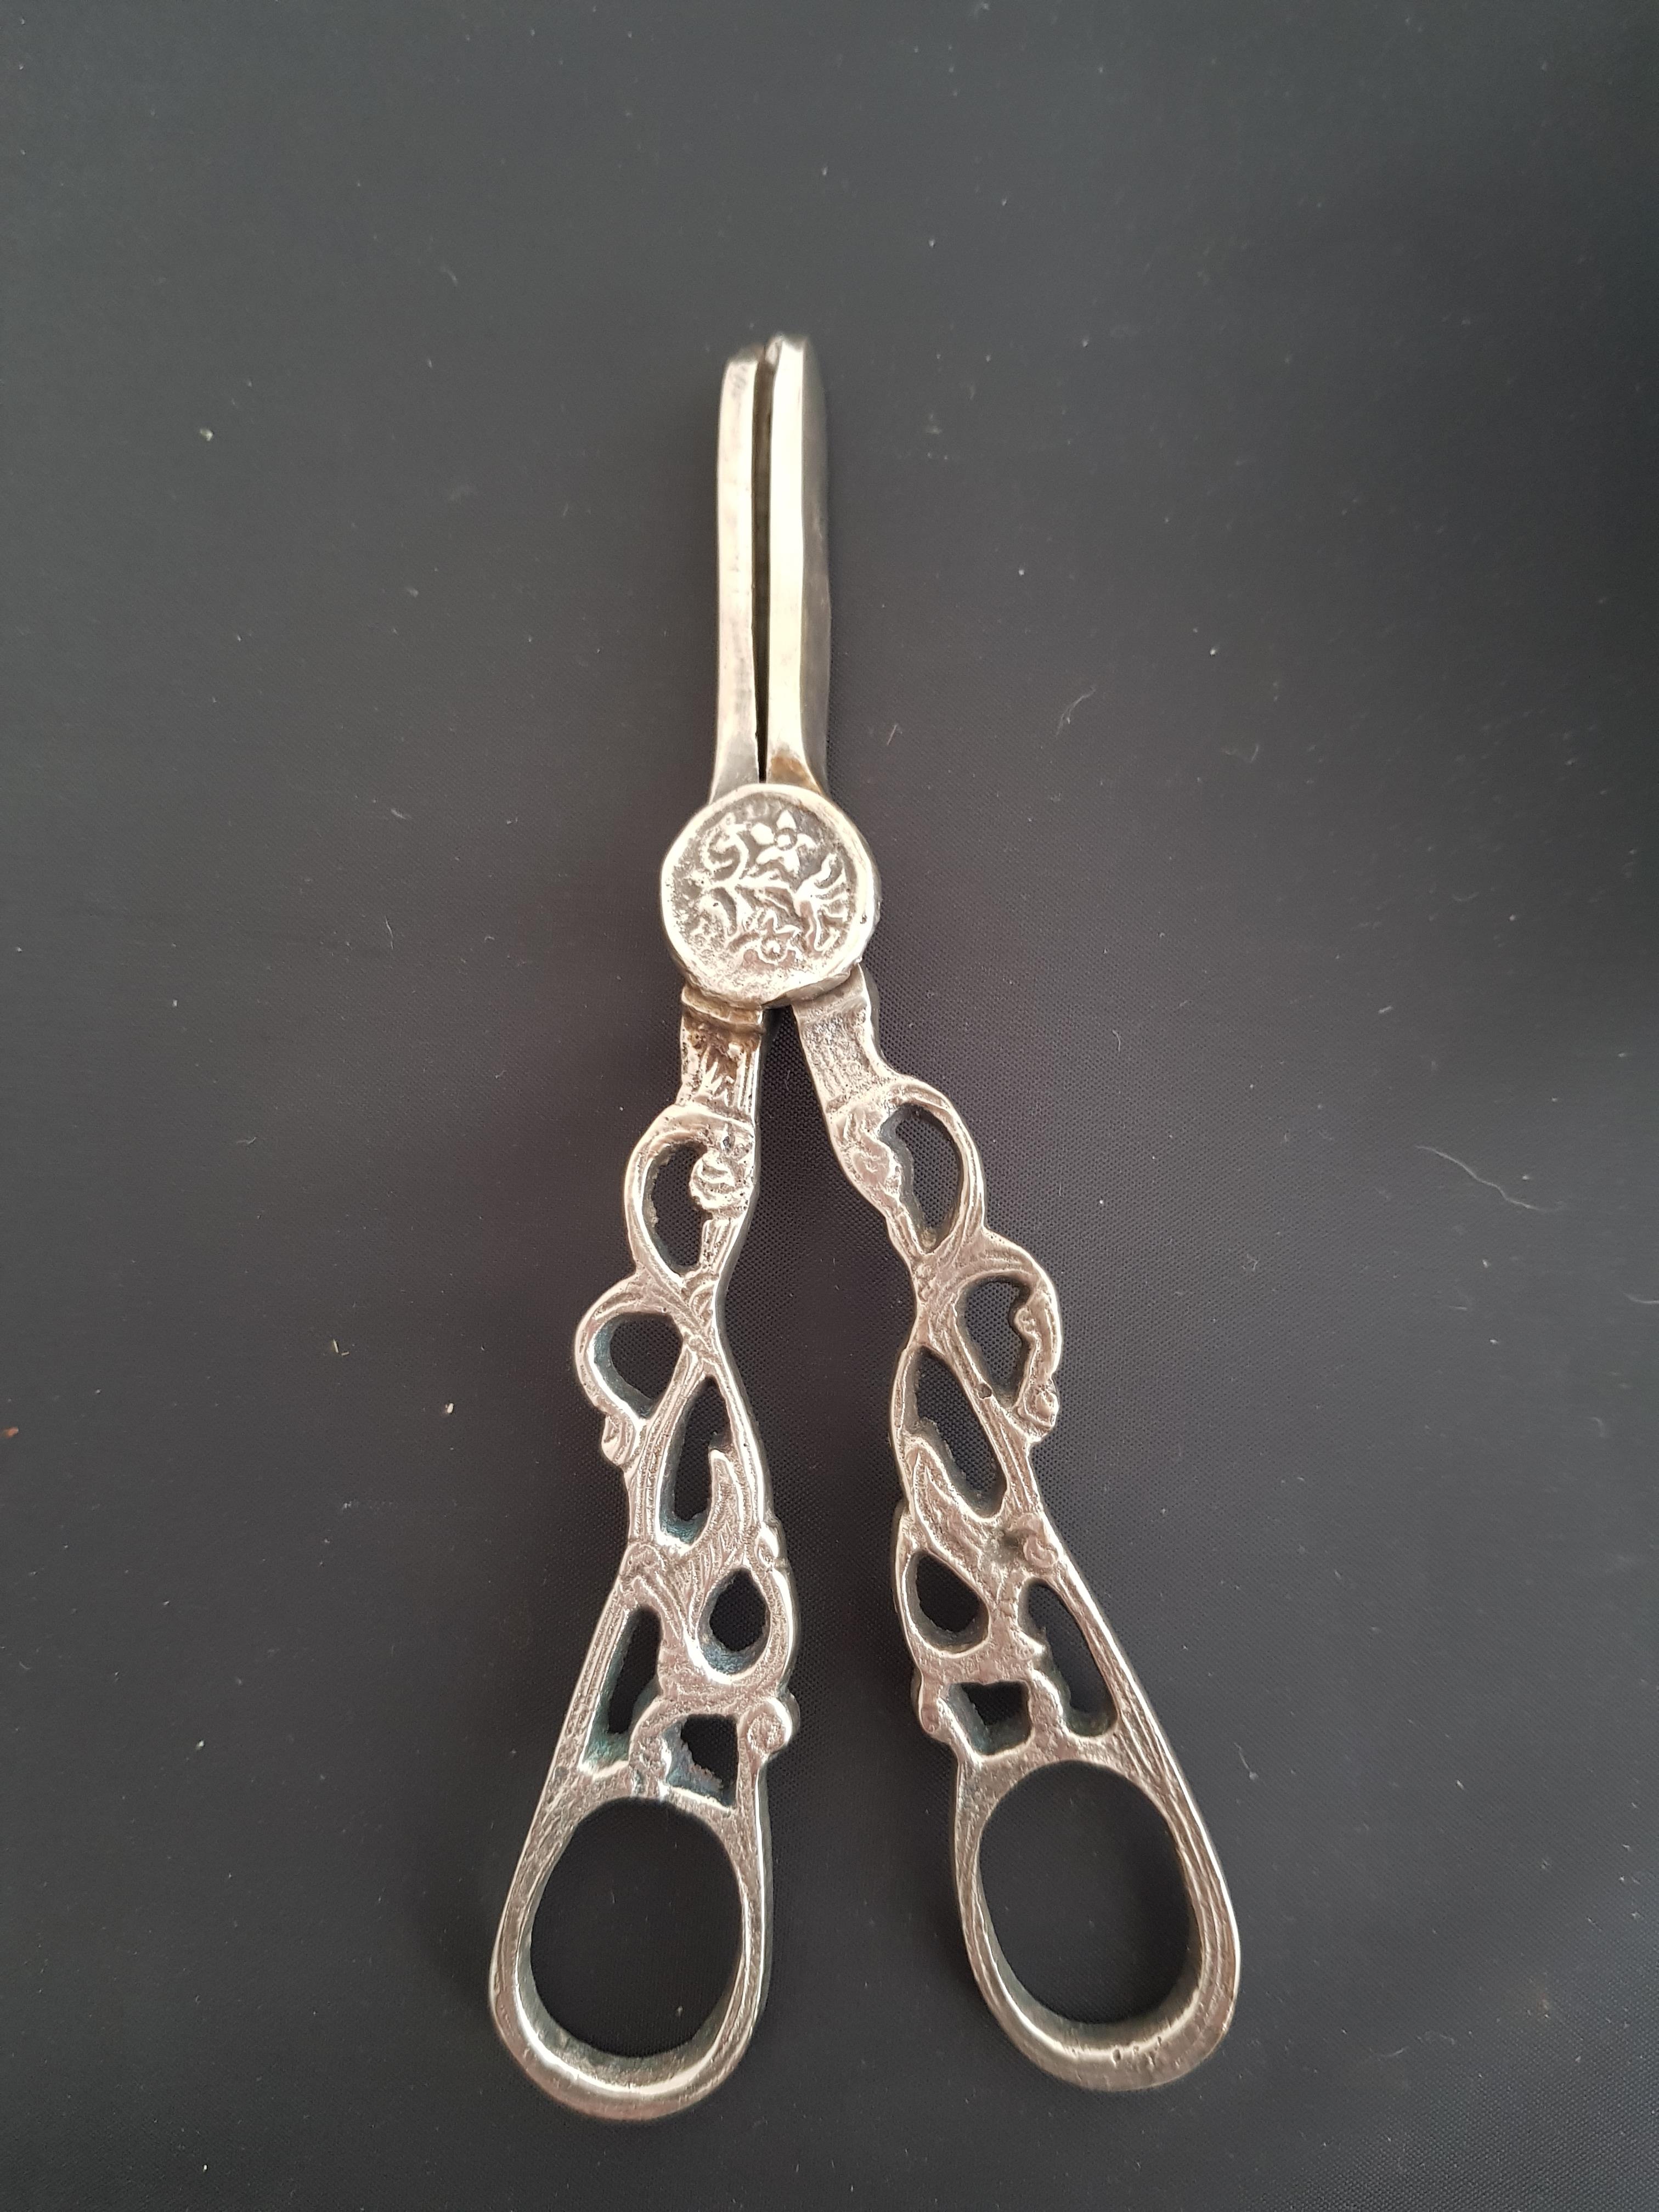 Vintage Grape scissors, sugar tongs, BonBon dish and other - Image 3 of 5